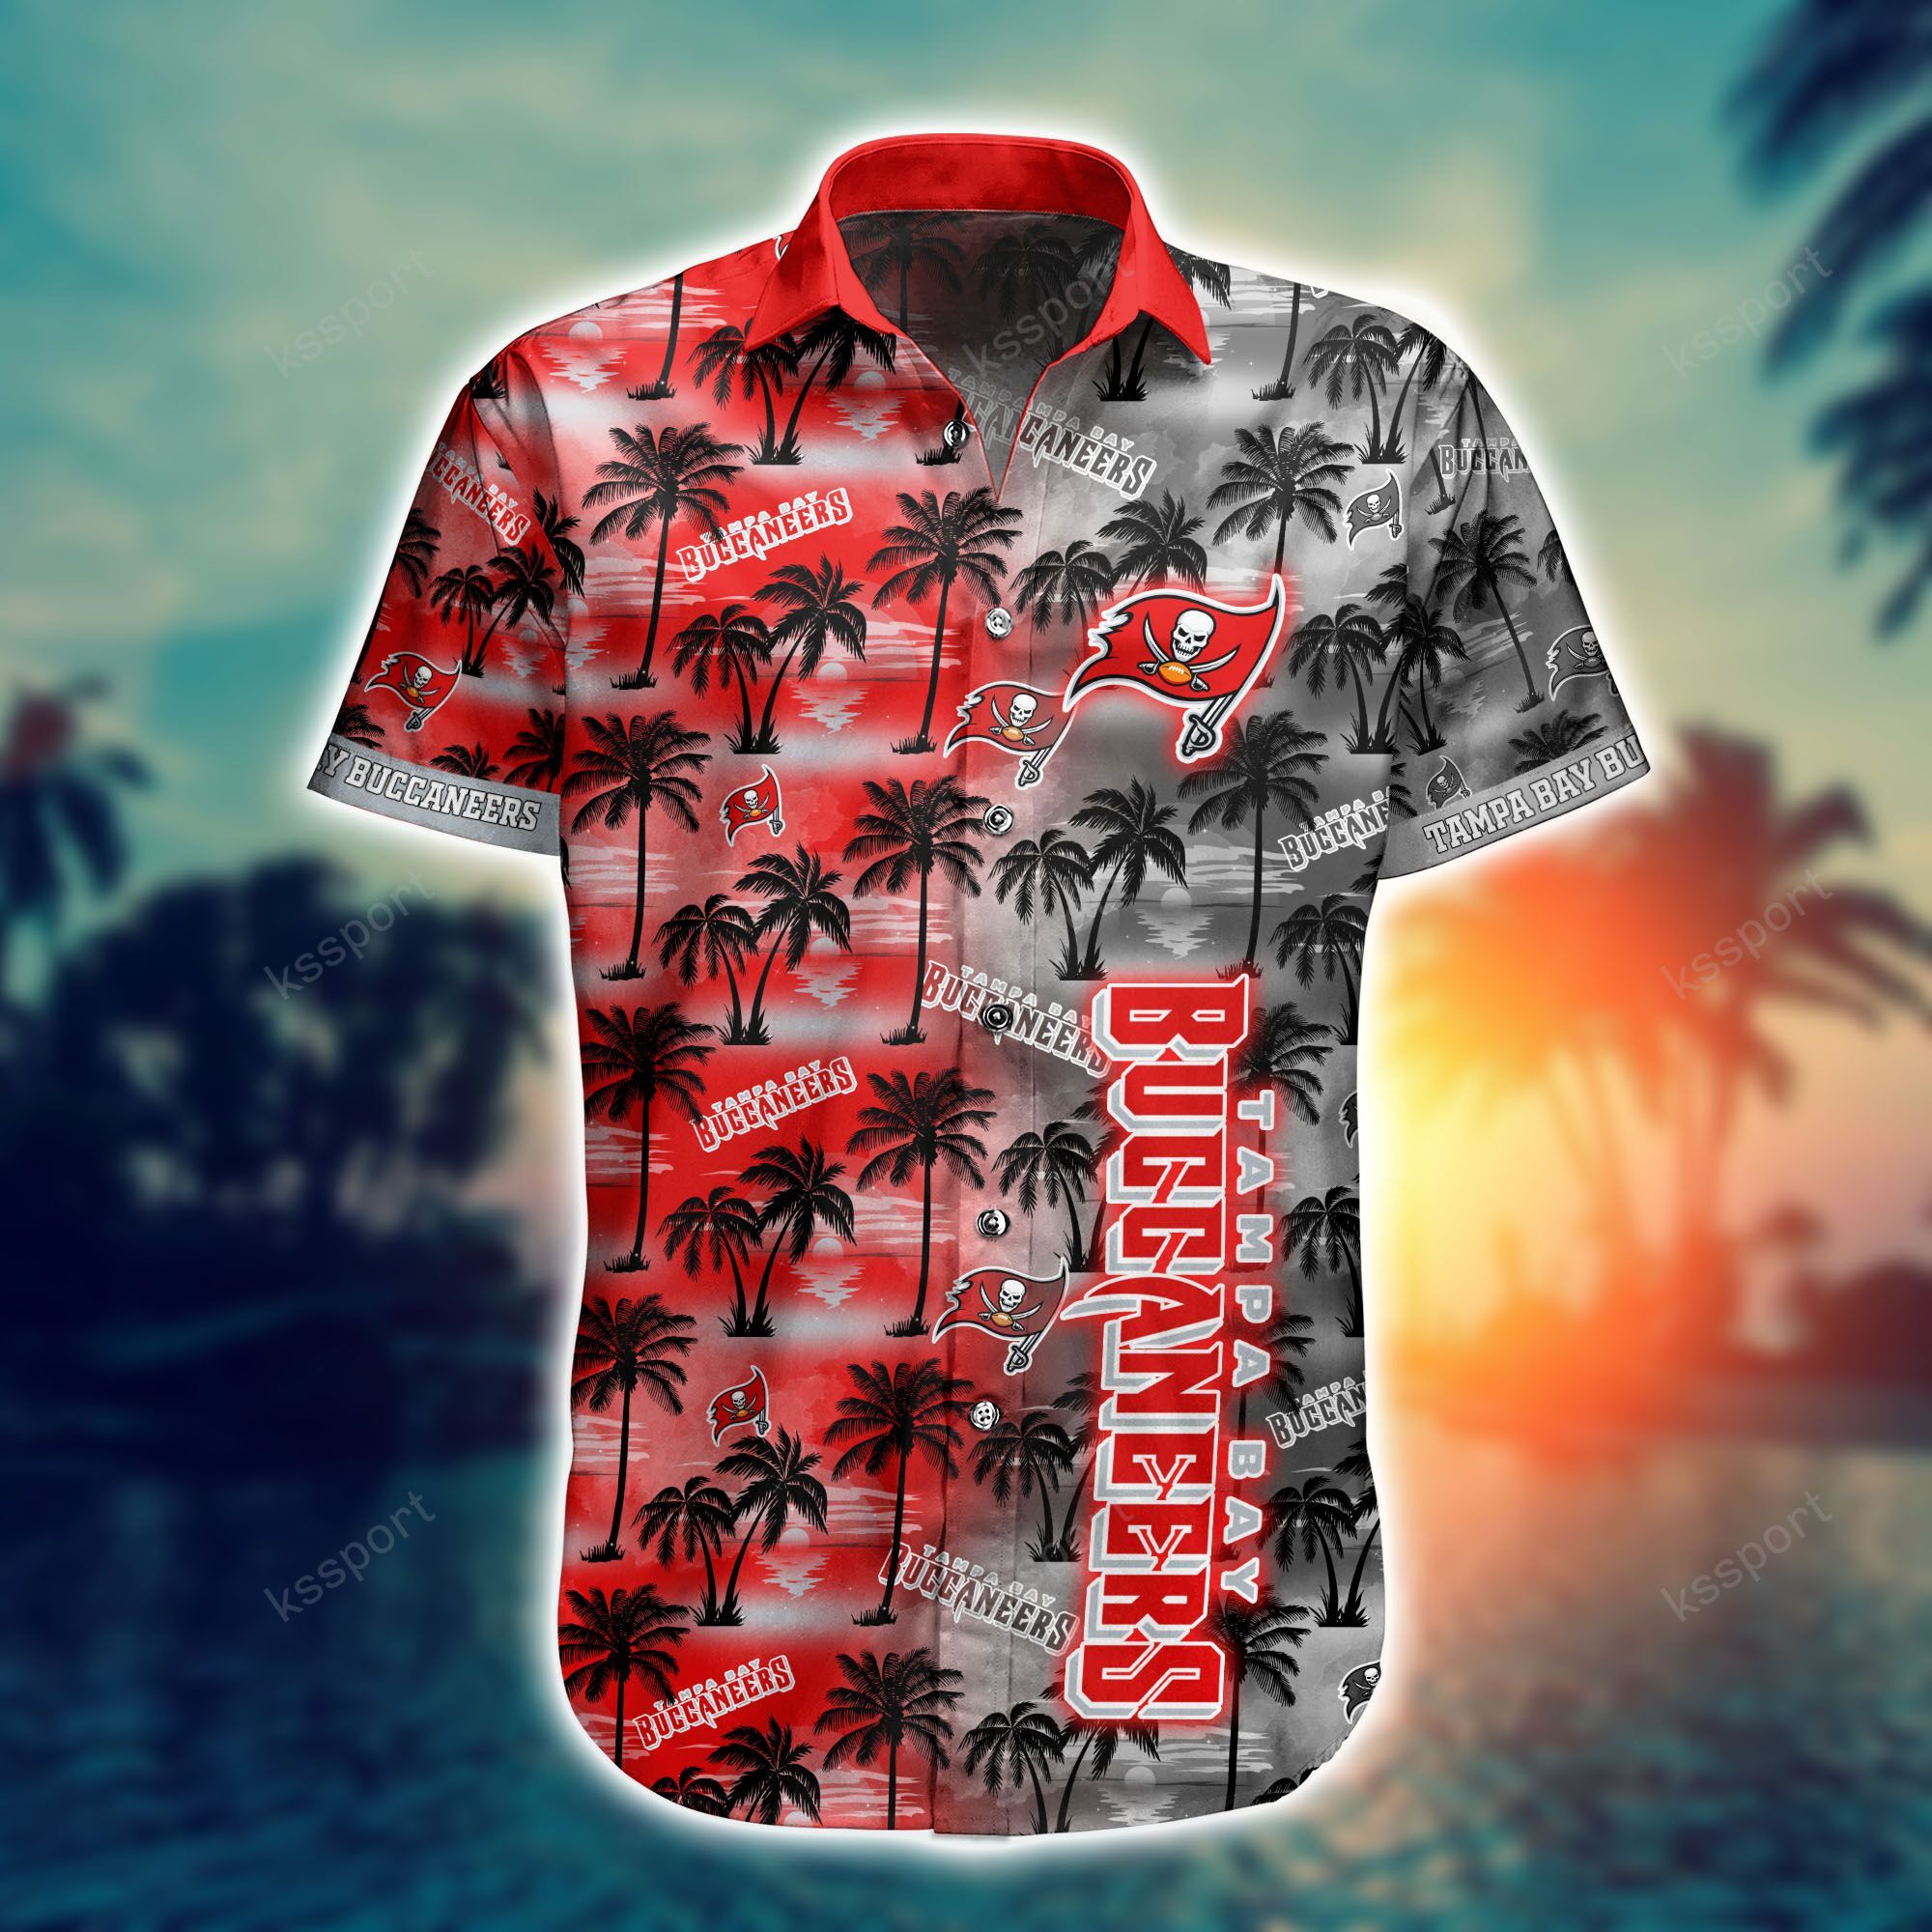 Top cool Hawaiian shirt 2022 - Make sure you get yours today before they run out! 209